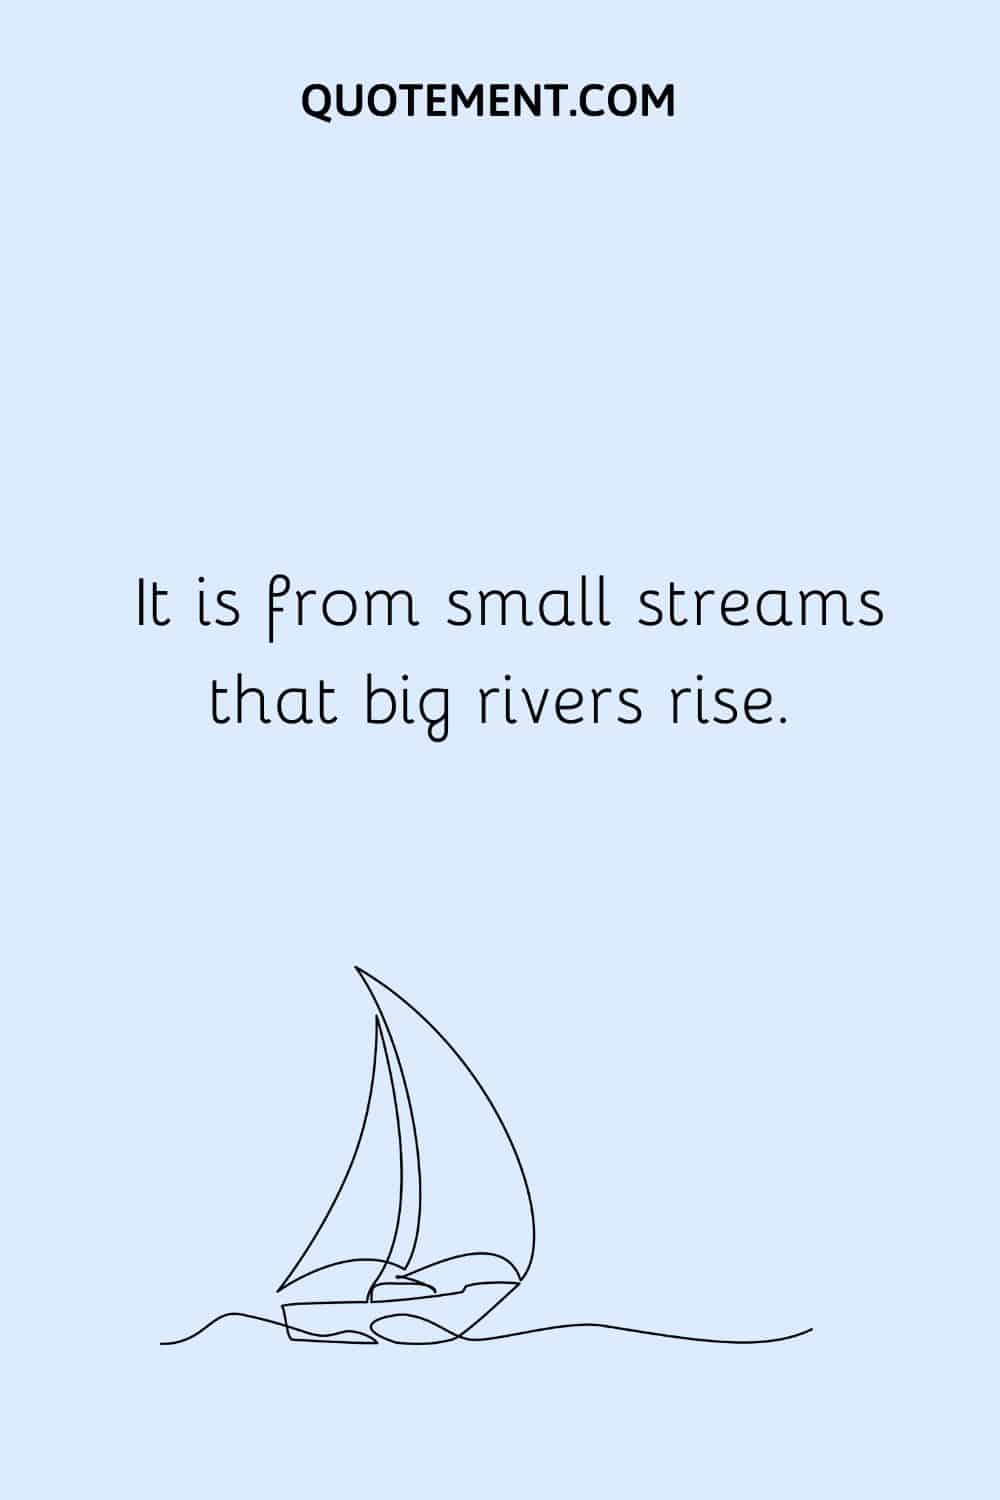  It is from small streams that big rivers rise